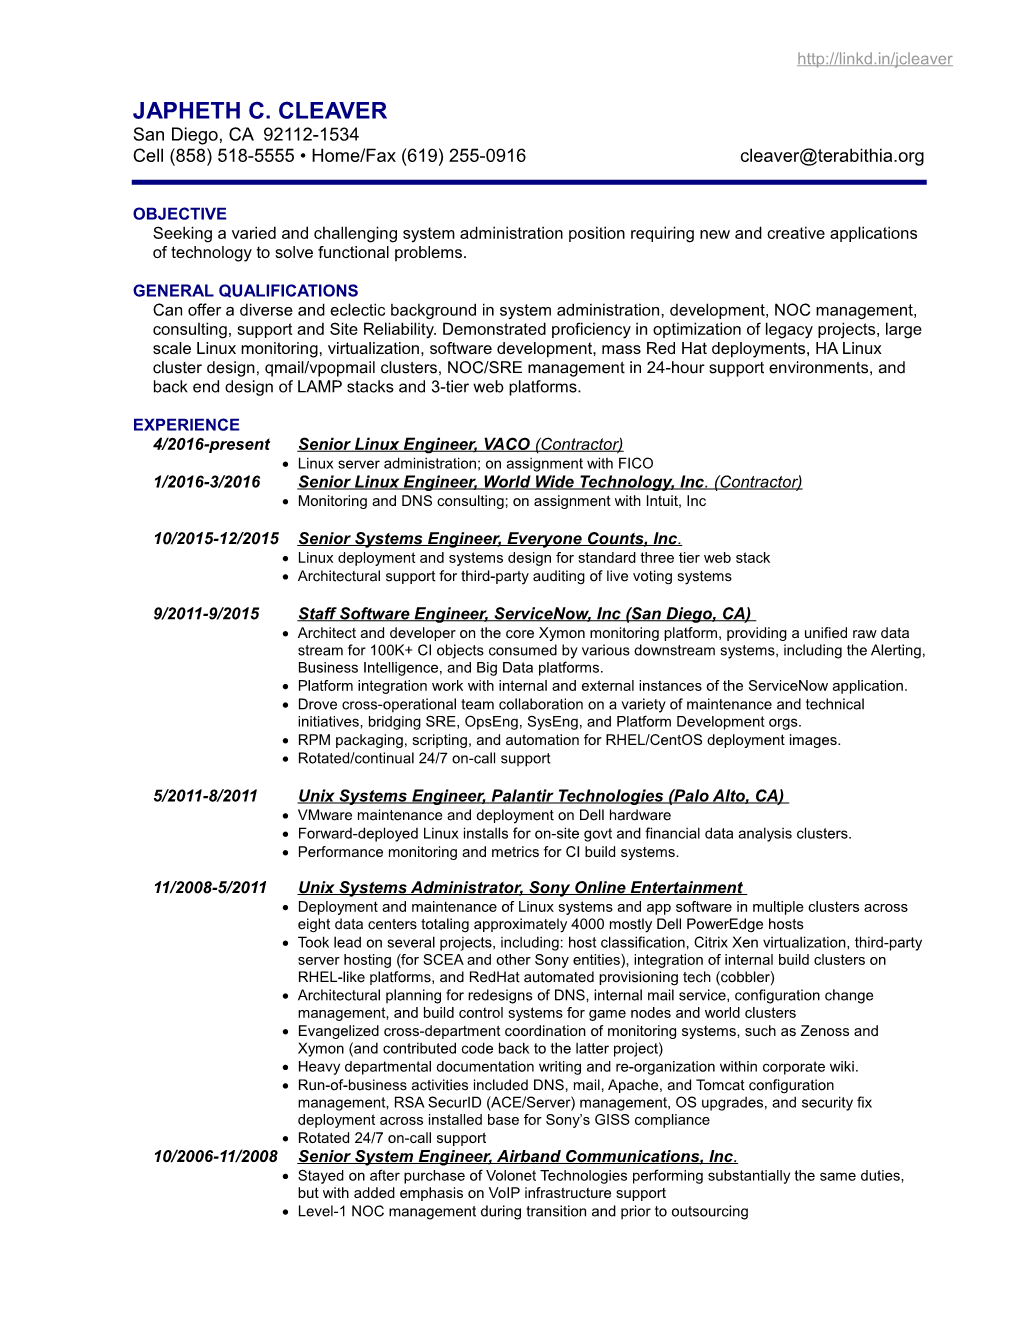 Resume - San Diego Staff Software Engineer and Senior Linux Systems Administrator